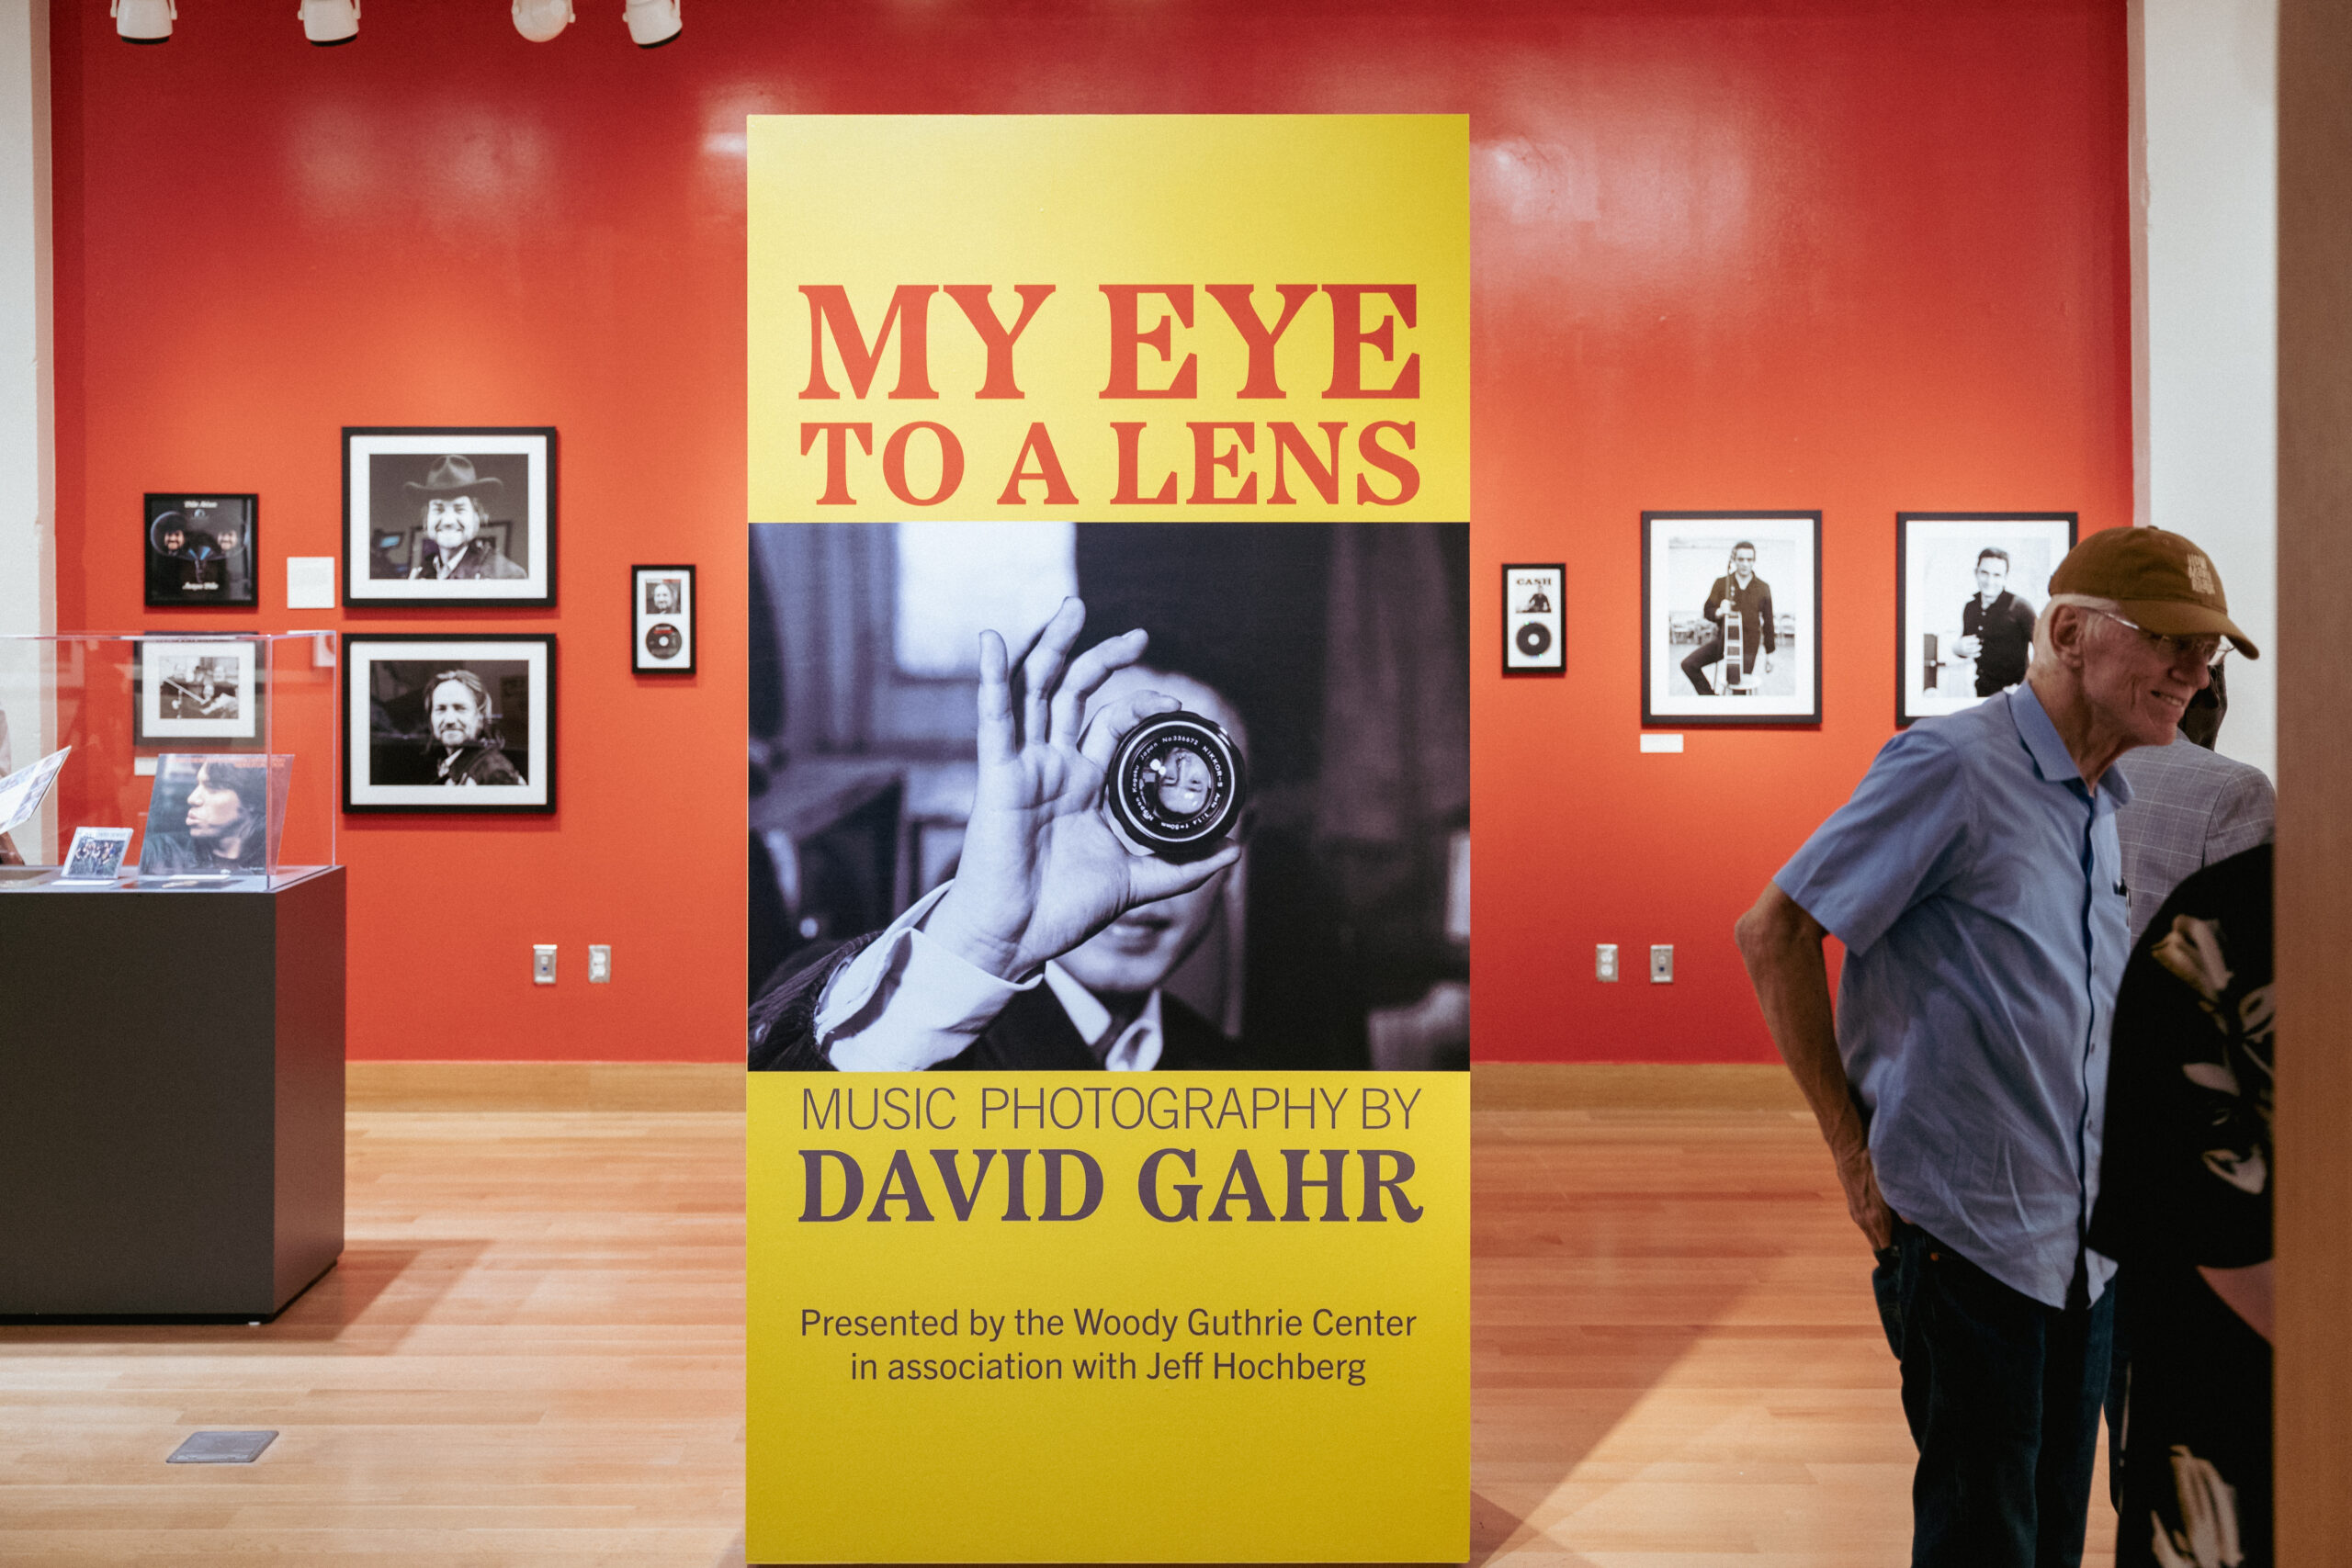 “My Eye to a Lens: Music Photography of David Gahr” exhibition at the Woody Guthrie Center